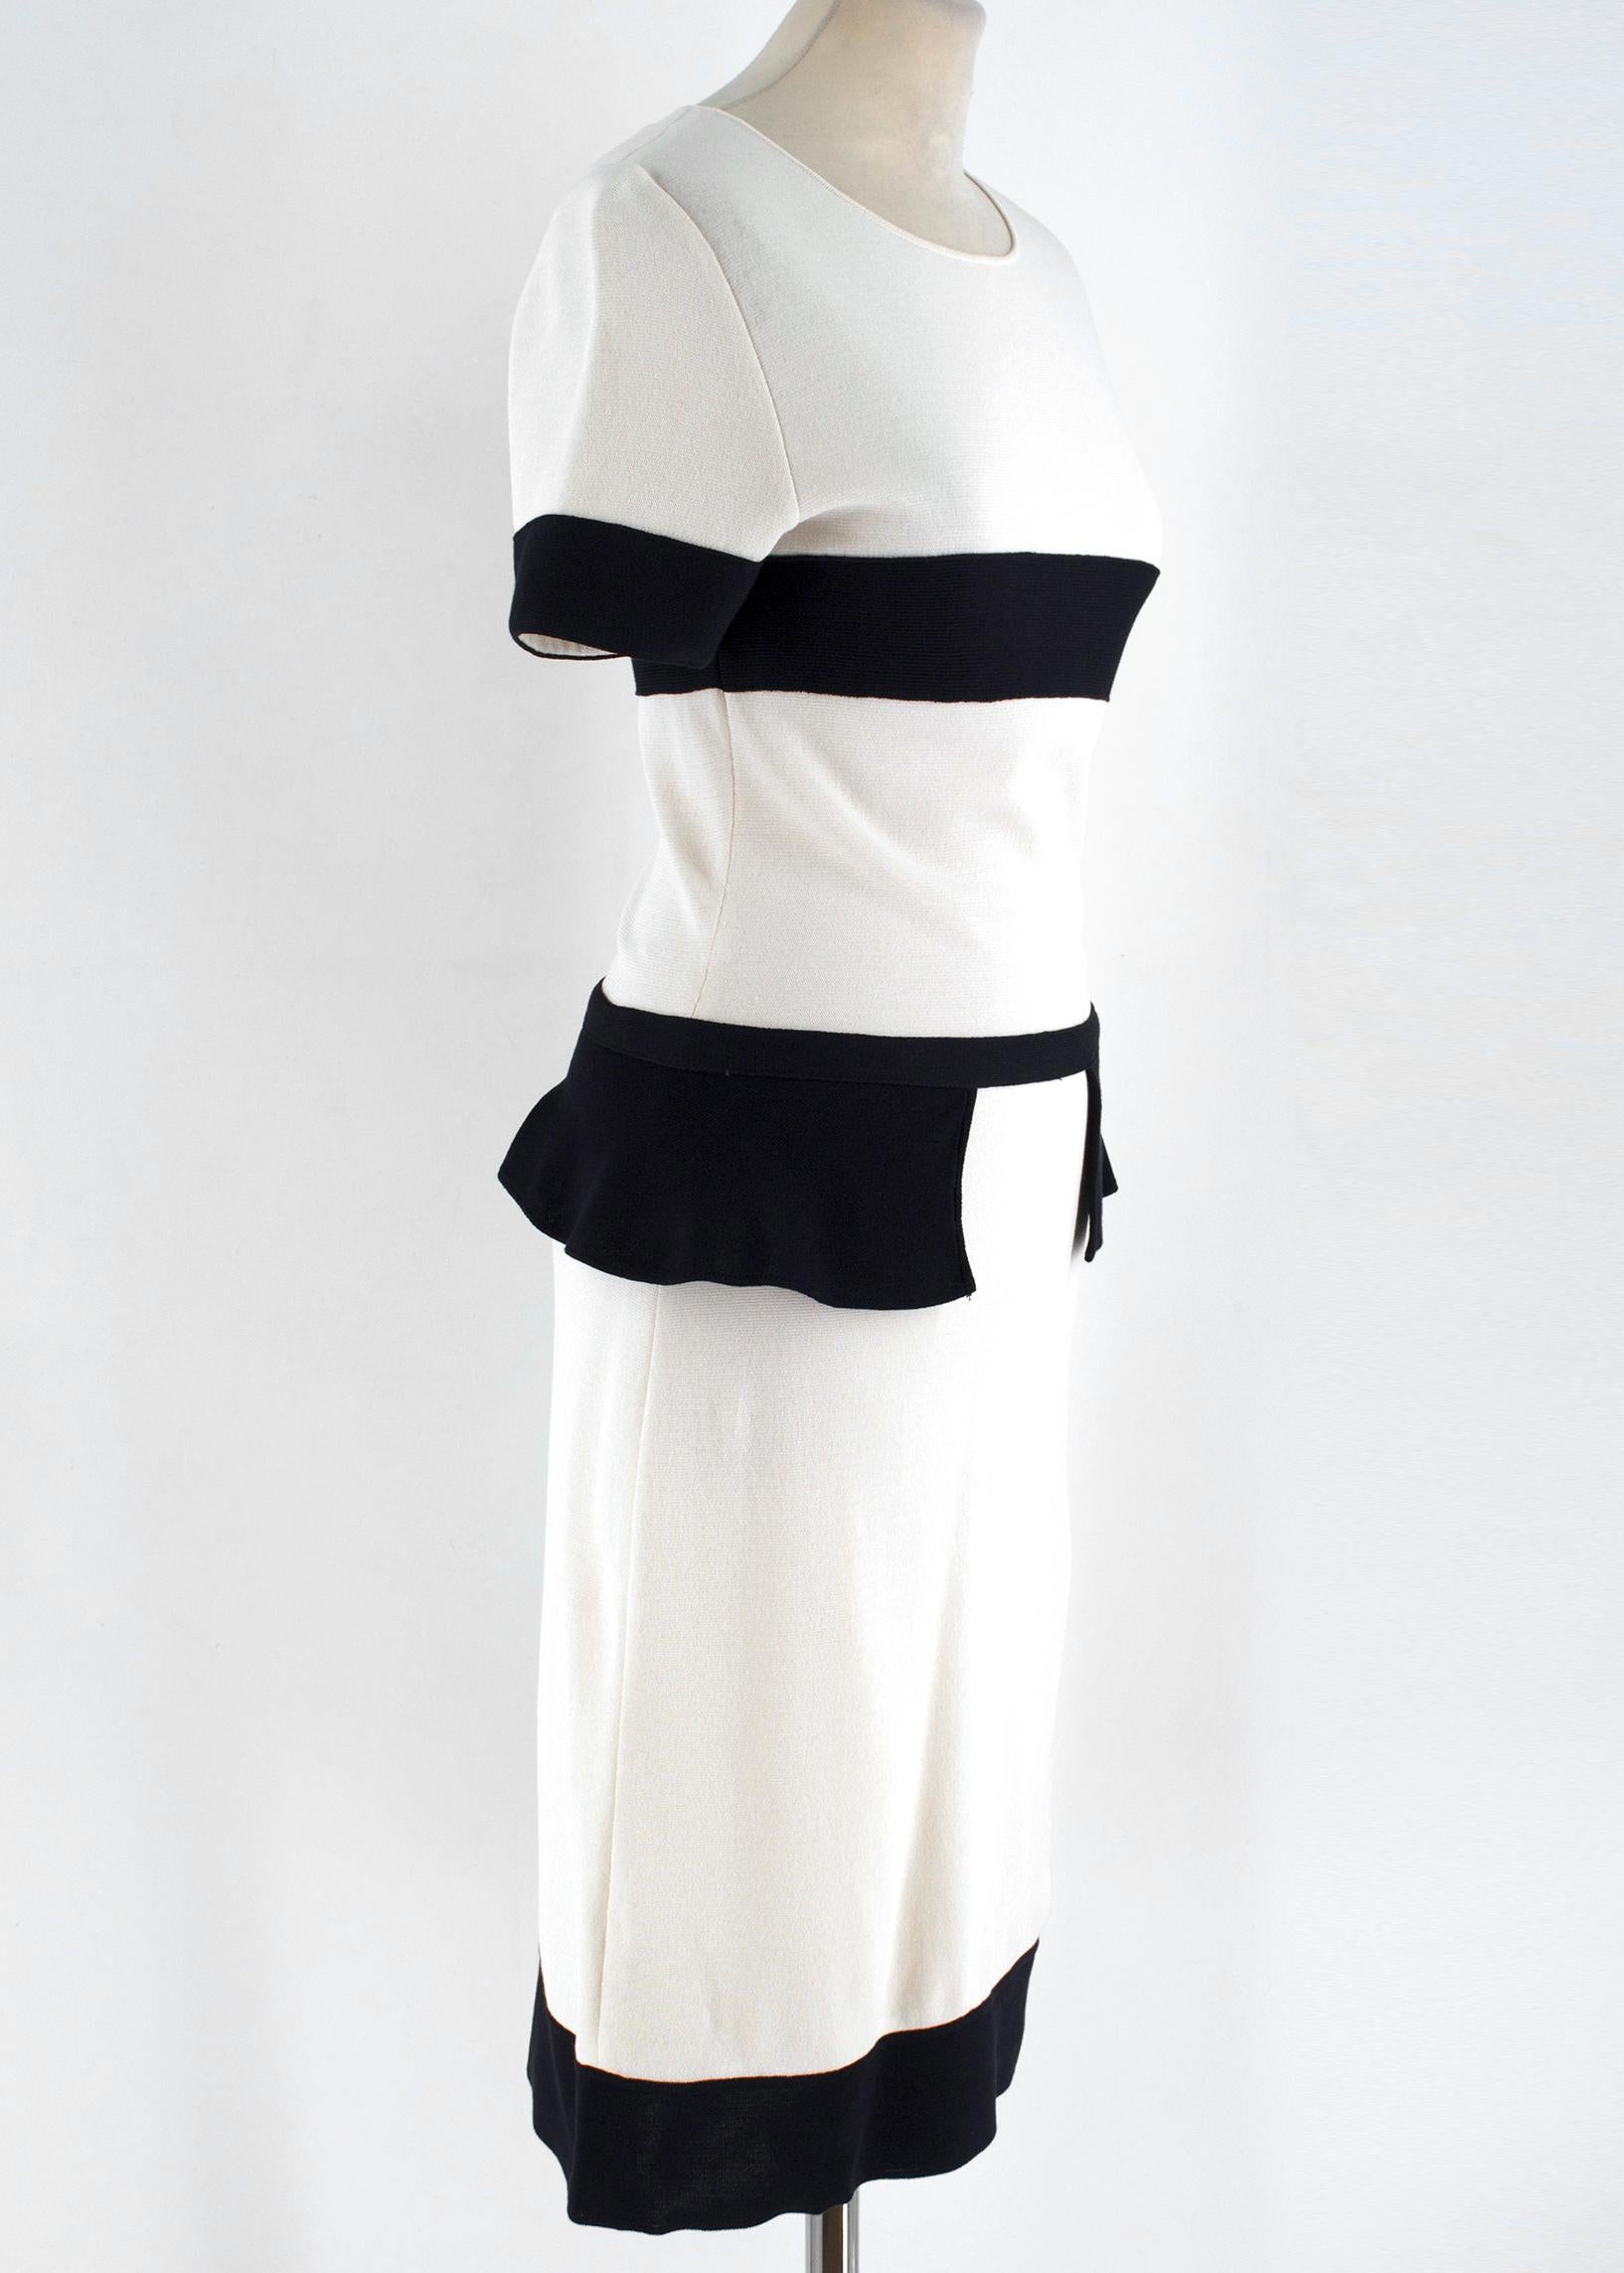 Giambattista Valli Ivory Peplum Dress

-Ivory dress with contrast black detailing
-Knee length 
-Short sleeves
-Back zip closure
-Peplum waistband
-Black cuffs, hemline, waistband and stripe across the bust

Please note, these items are pre-owned